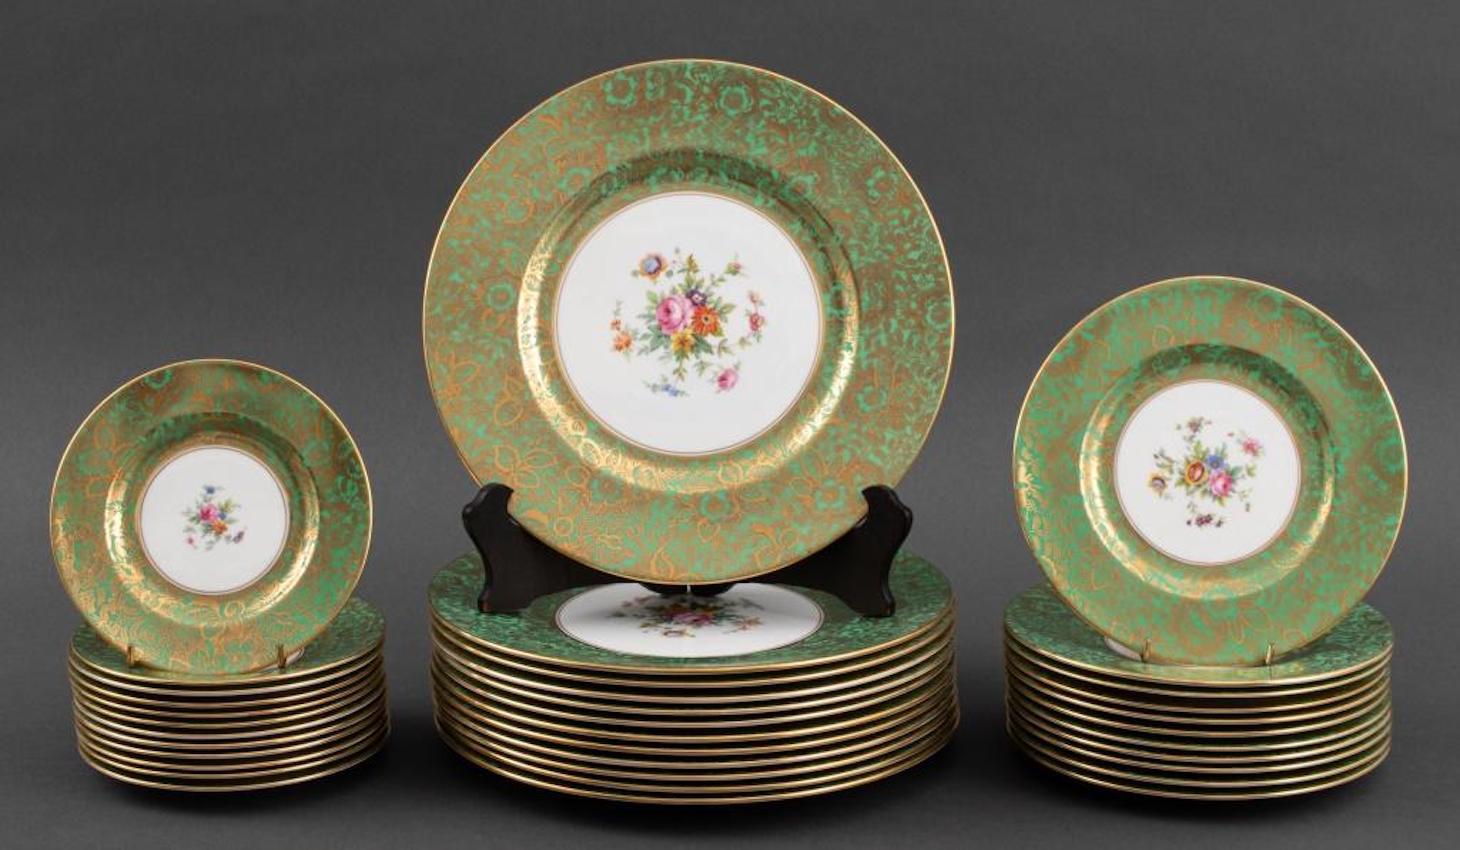 Minton hand painted and decorated porcelain dinner service for twelve people.
Made in England between 1948 -1970 